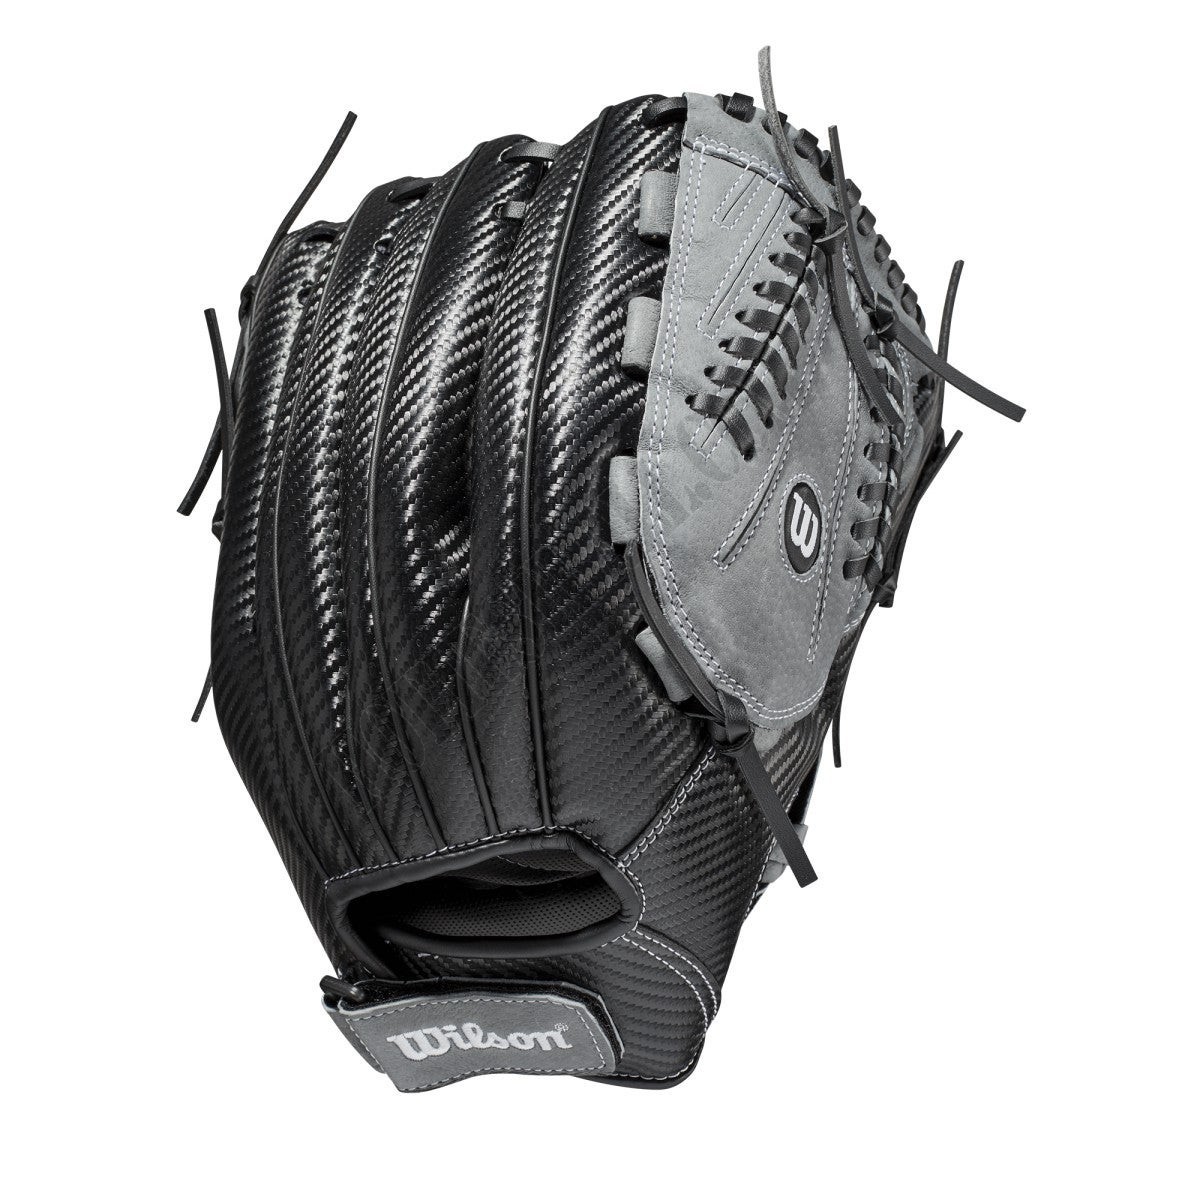 2021 A360 SP13 13" Slowpitch Softball Glove ● Wilson Promotions - -1